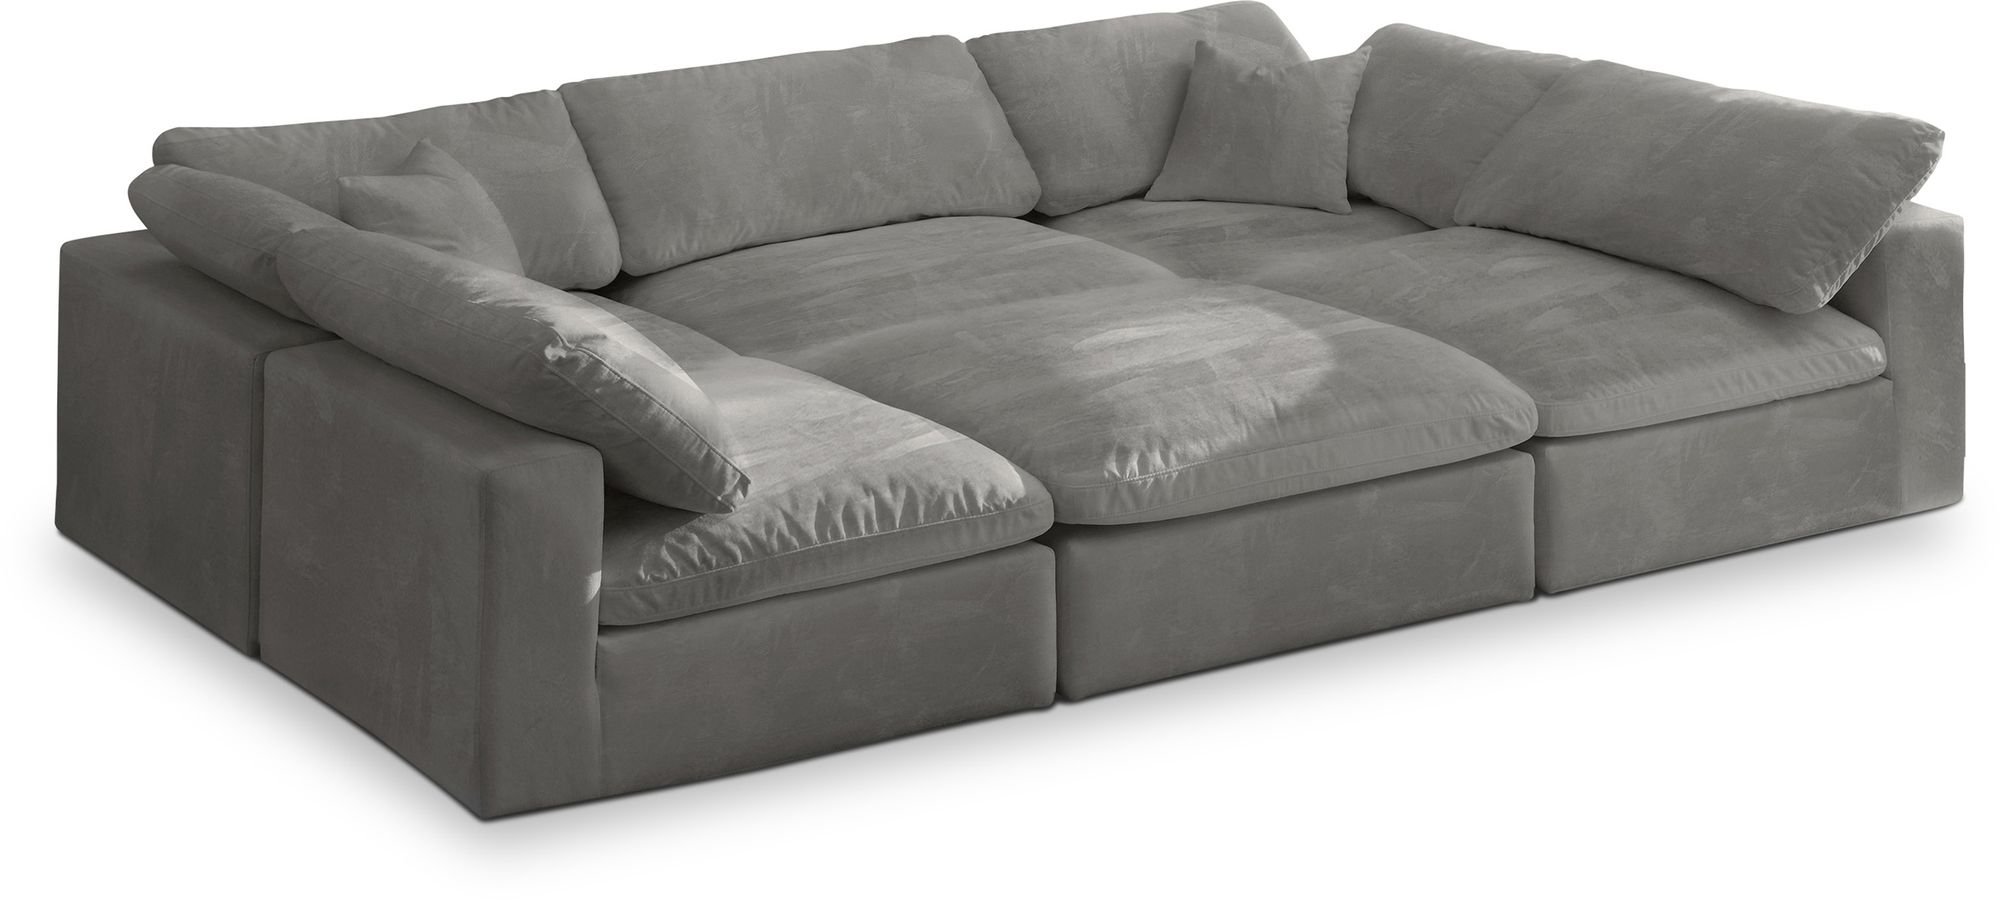 Ultra Cozy 34403 ULTRA COZY GREY REVERSABLE SOFA, CHAISE, 7 Day Furniture